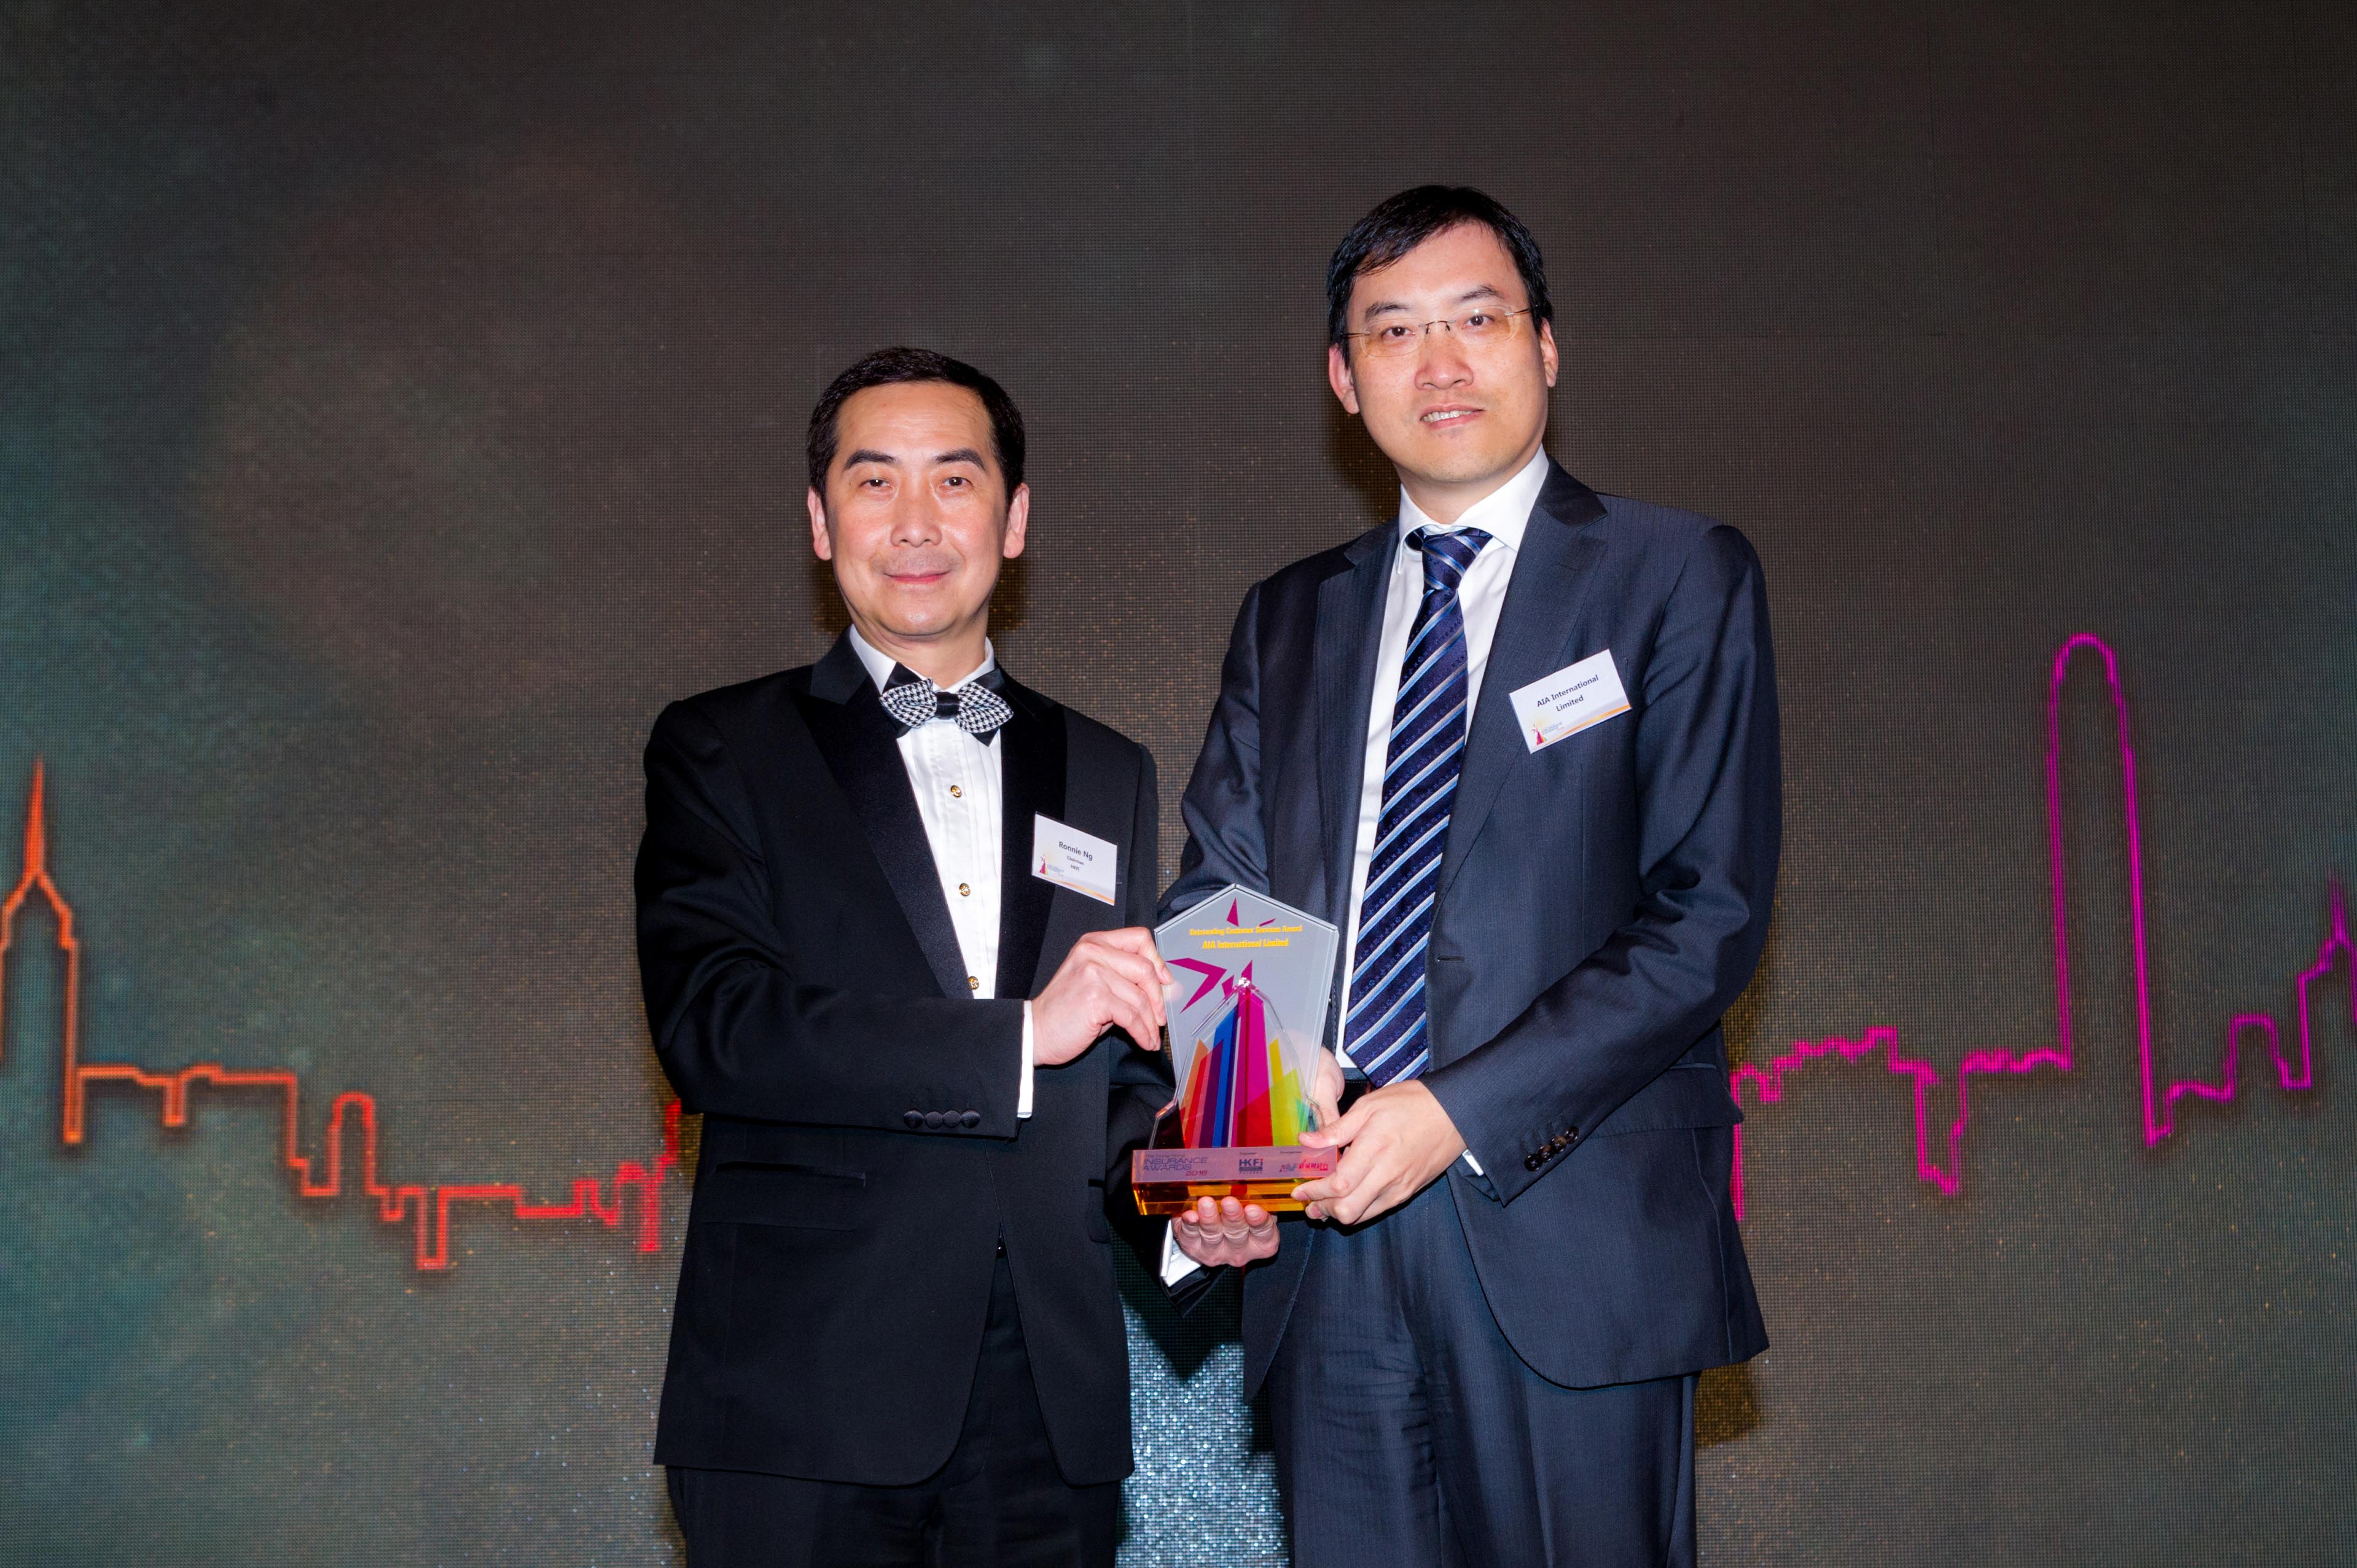 Mr Jacky Chan, CEO of AIA Hong Kong & Macau (right), received the Outstanding Customer Services Award on behalf of the Company at The Hong Kong Insurance Awards 2016.